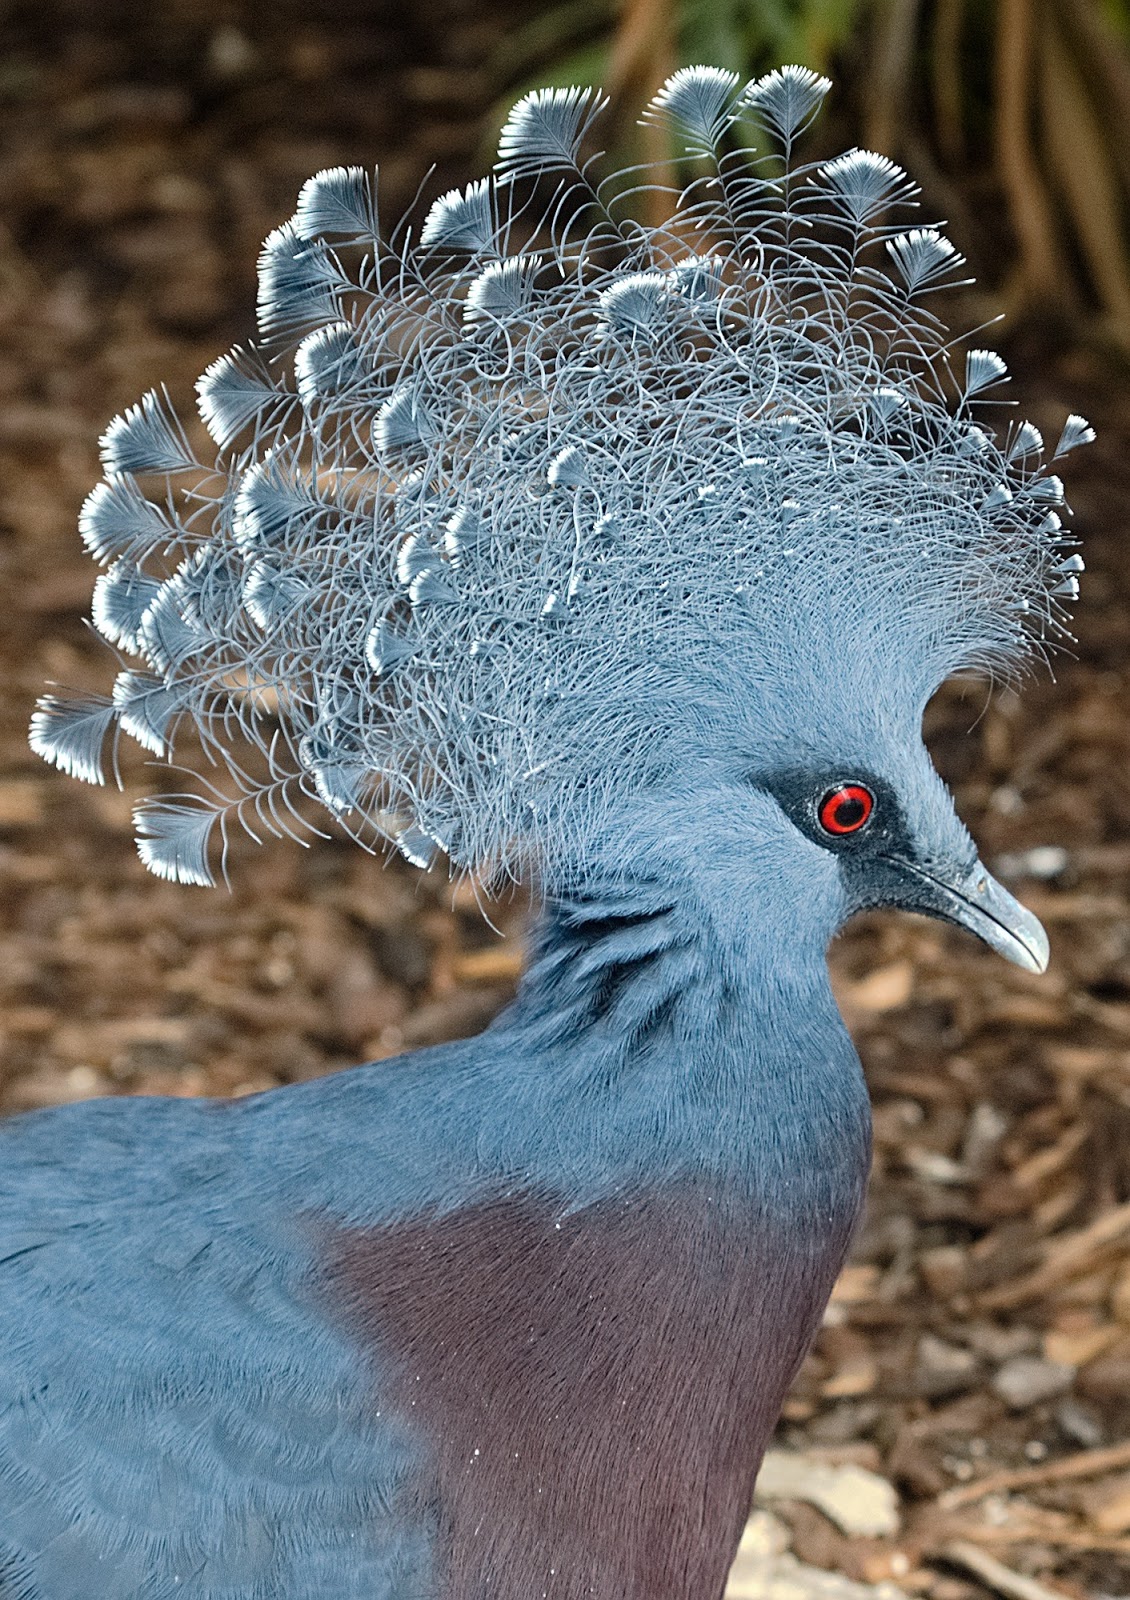 Crested pigeon fancy hair style - About Wild Animals